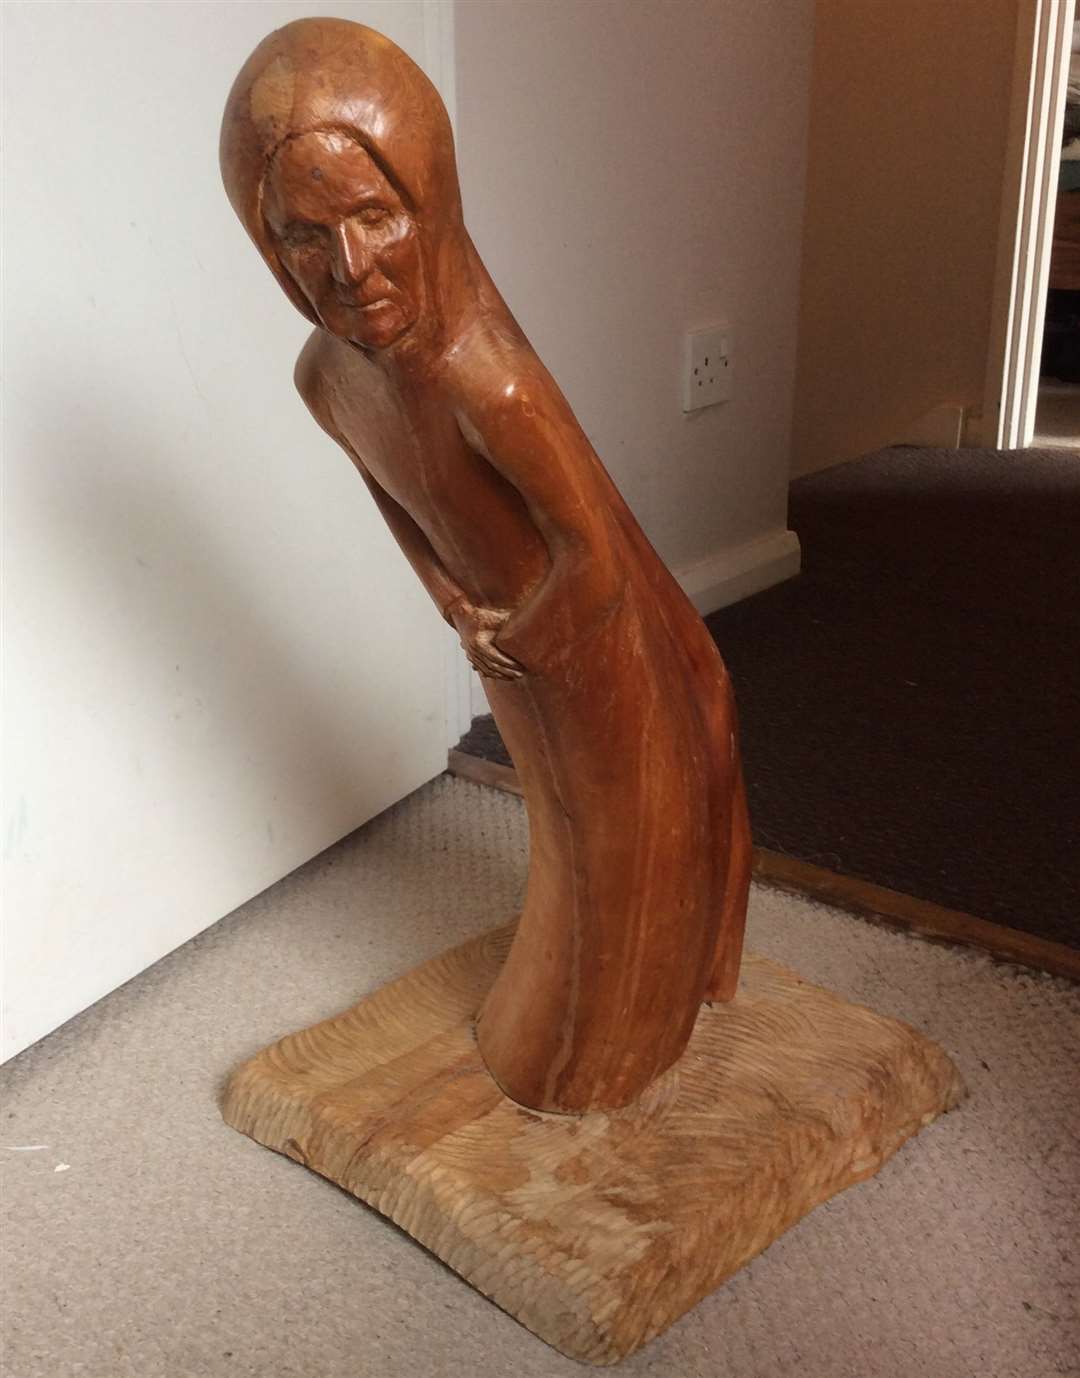 The Frank Bruce sculpture which is being offered for sale at the exhibition.